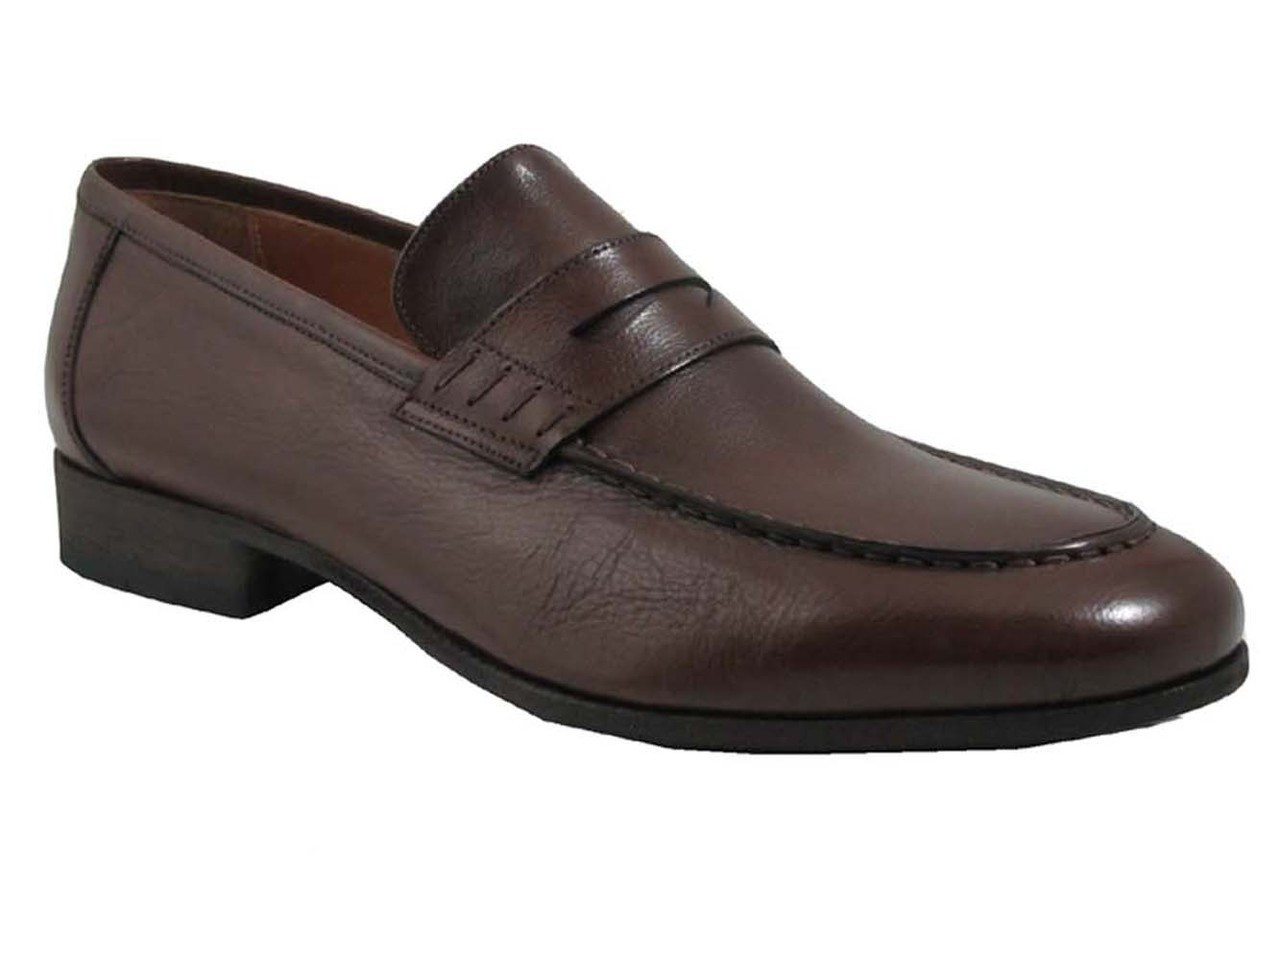 Rossi Men's Italian Leather Penny Loafers Shoes